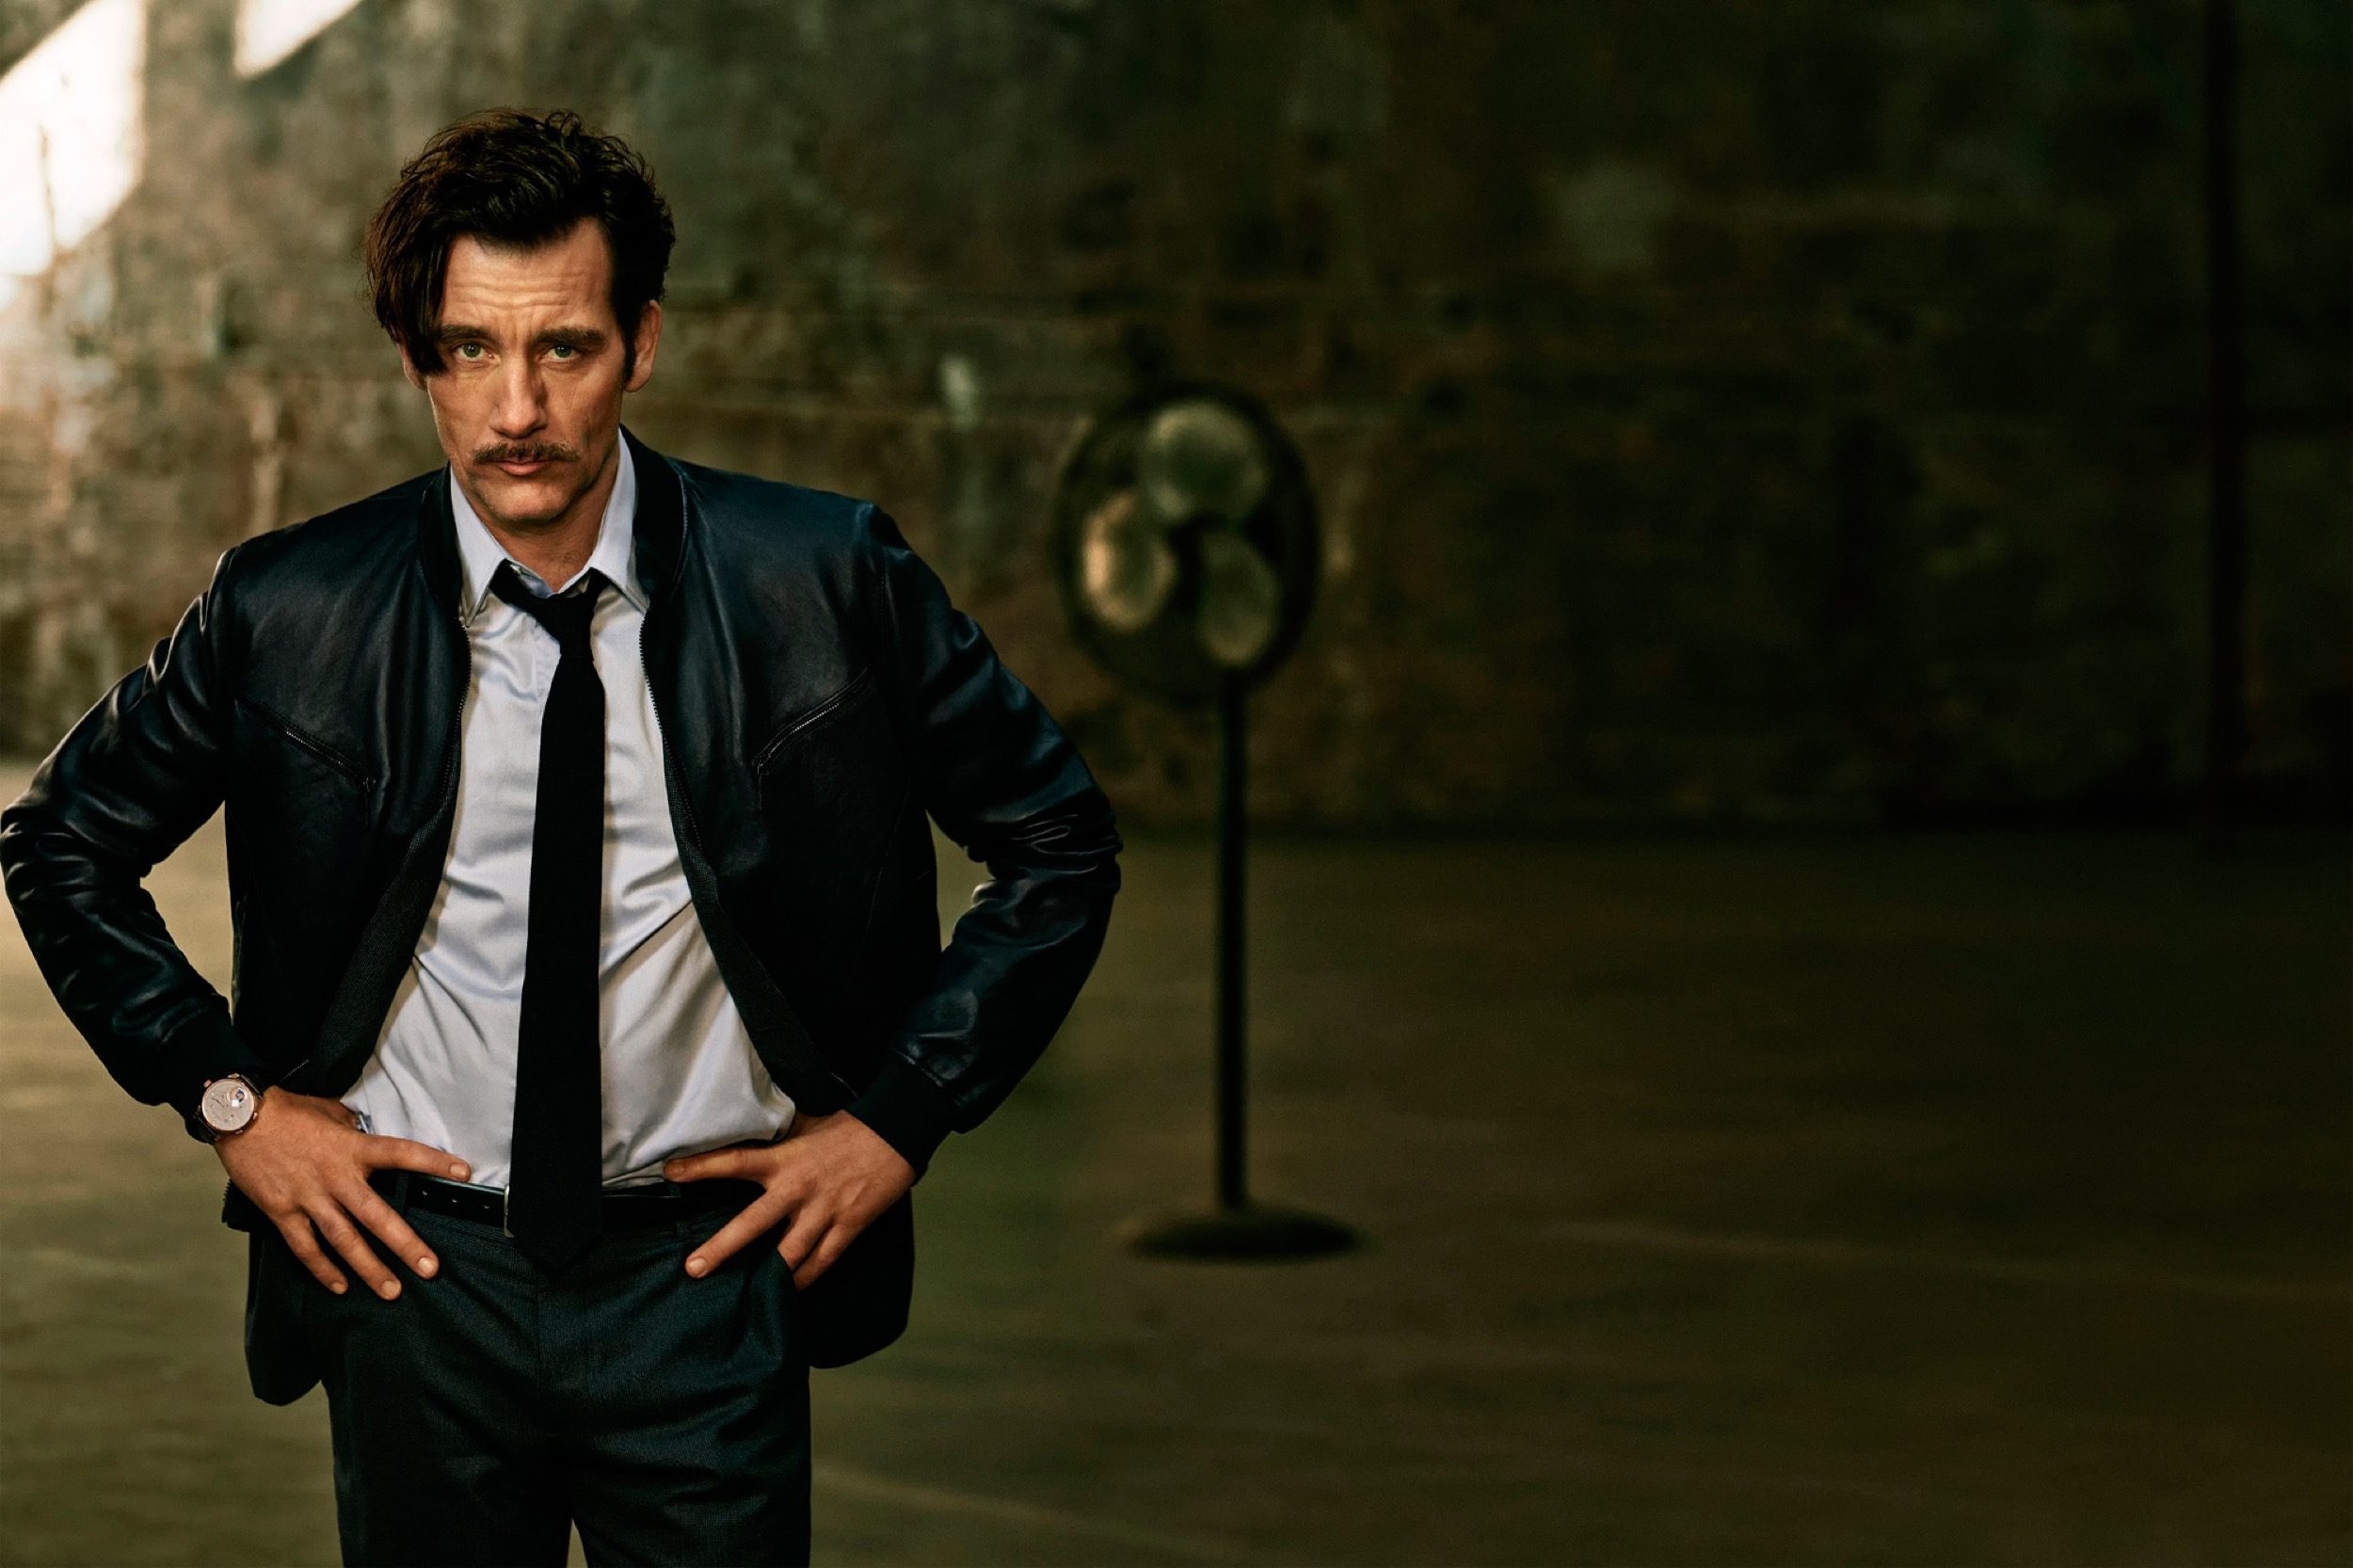 kathrin-hohberg-gq-style-brazil-clive-owen-anders-overgaard-04